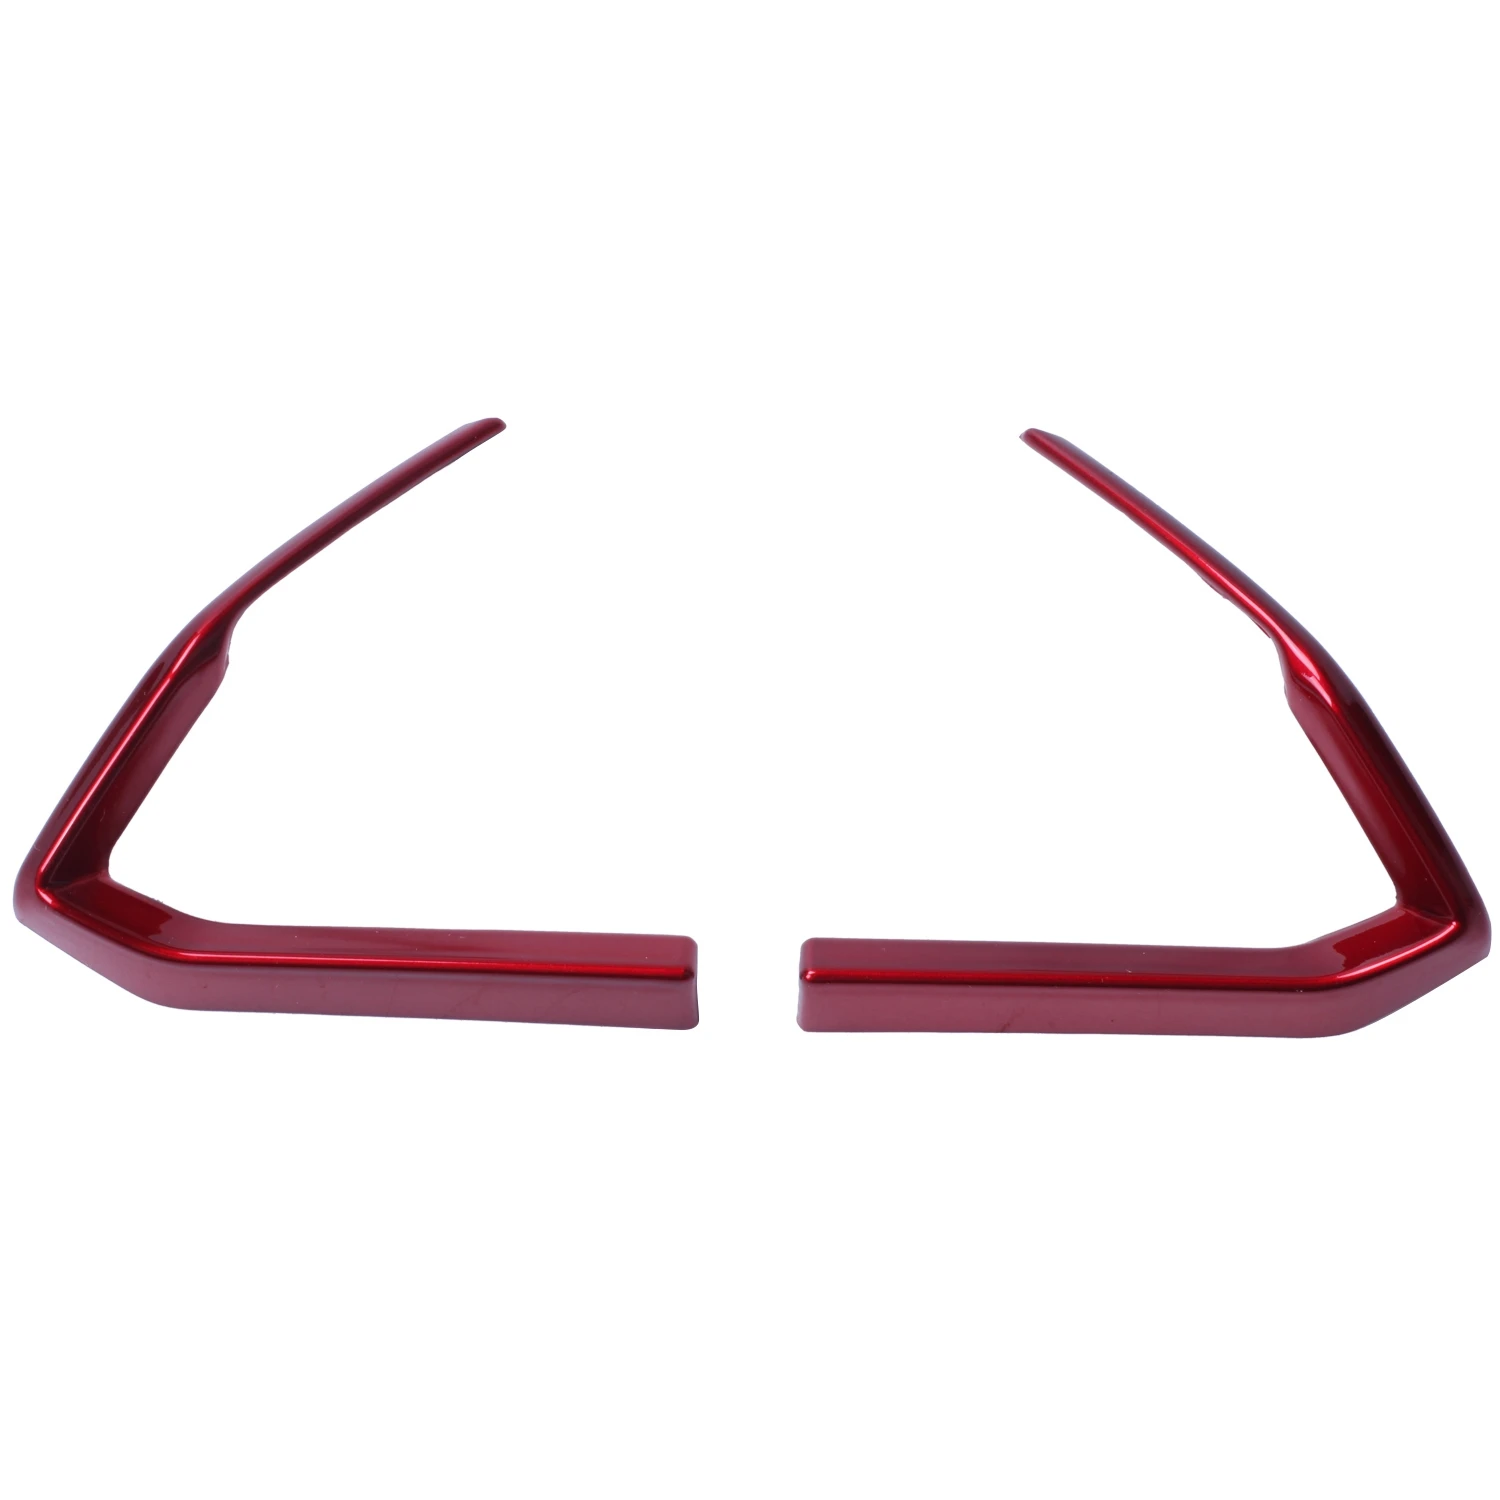 

Red ABS Interior Steering Wheel Cover Trim for Mazda CX-3 CX3 2016-2018 FashionInterior Accessories Interior Mouldings 1 pair